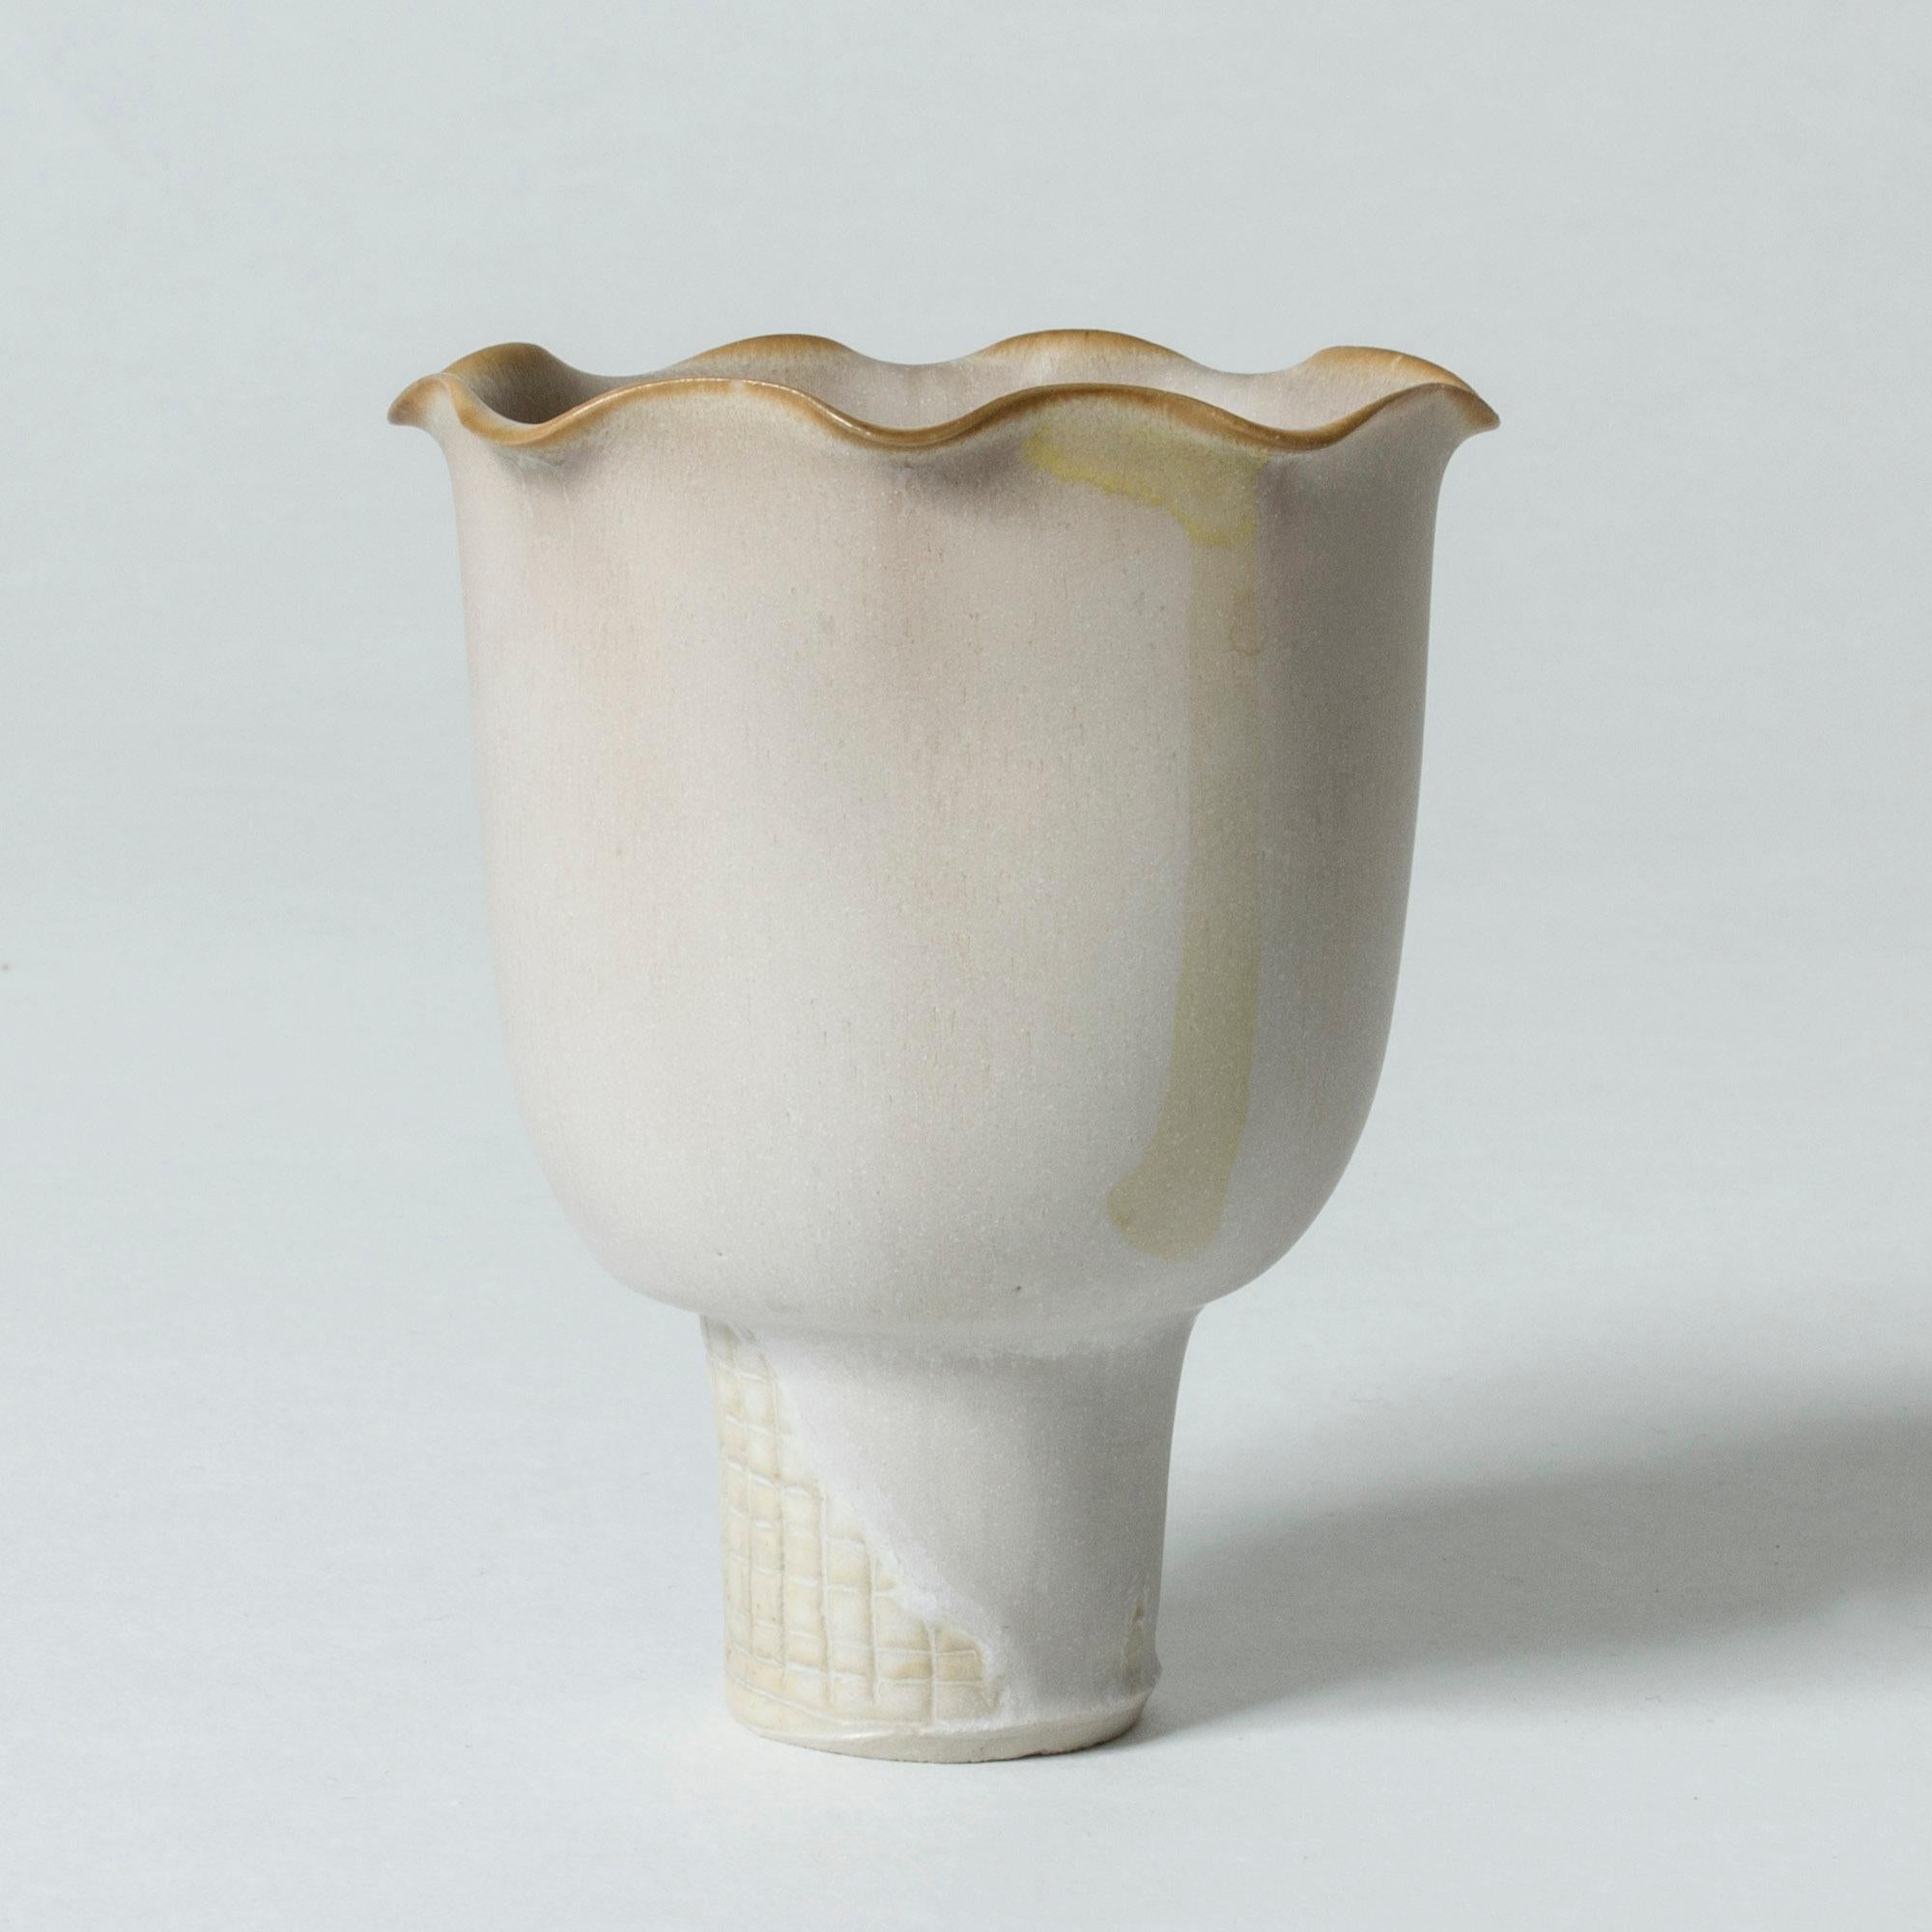 Lovely, small stoneware “Farsta” vase by Wilhelm Kåge. Beautiful wave-shaped rim and checkered base that is partially glazed. Eggshell white glaze.

“Farsta” stoneware is recognized as being the best and most exclusive that has come out of Swedish